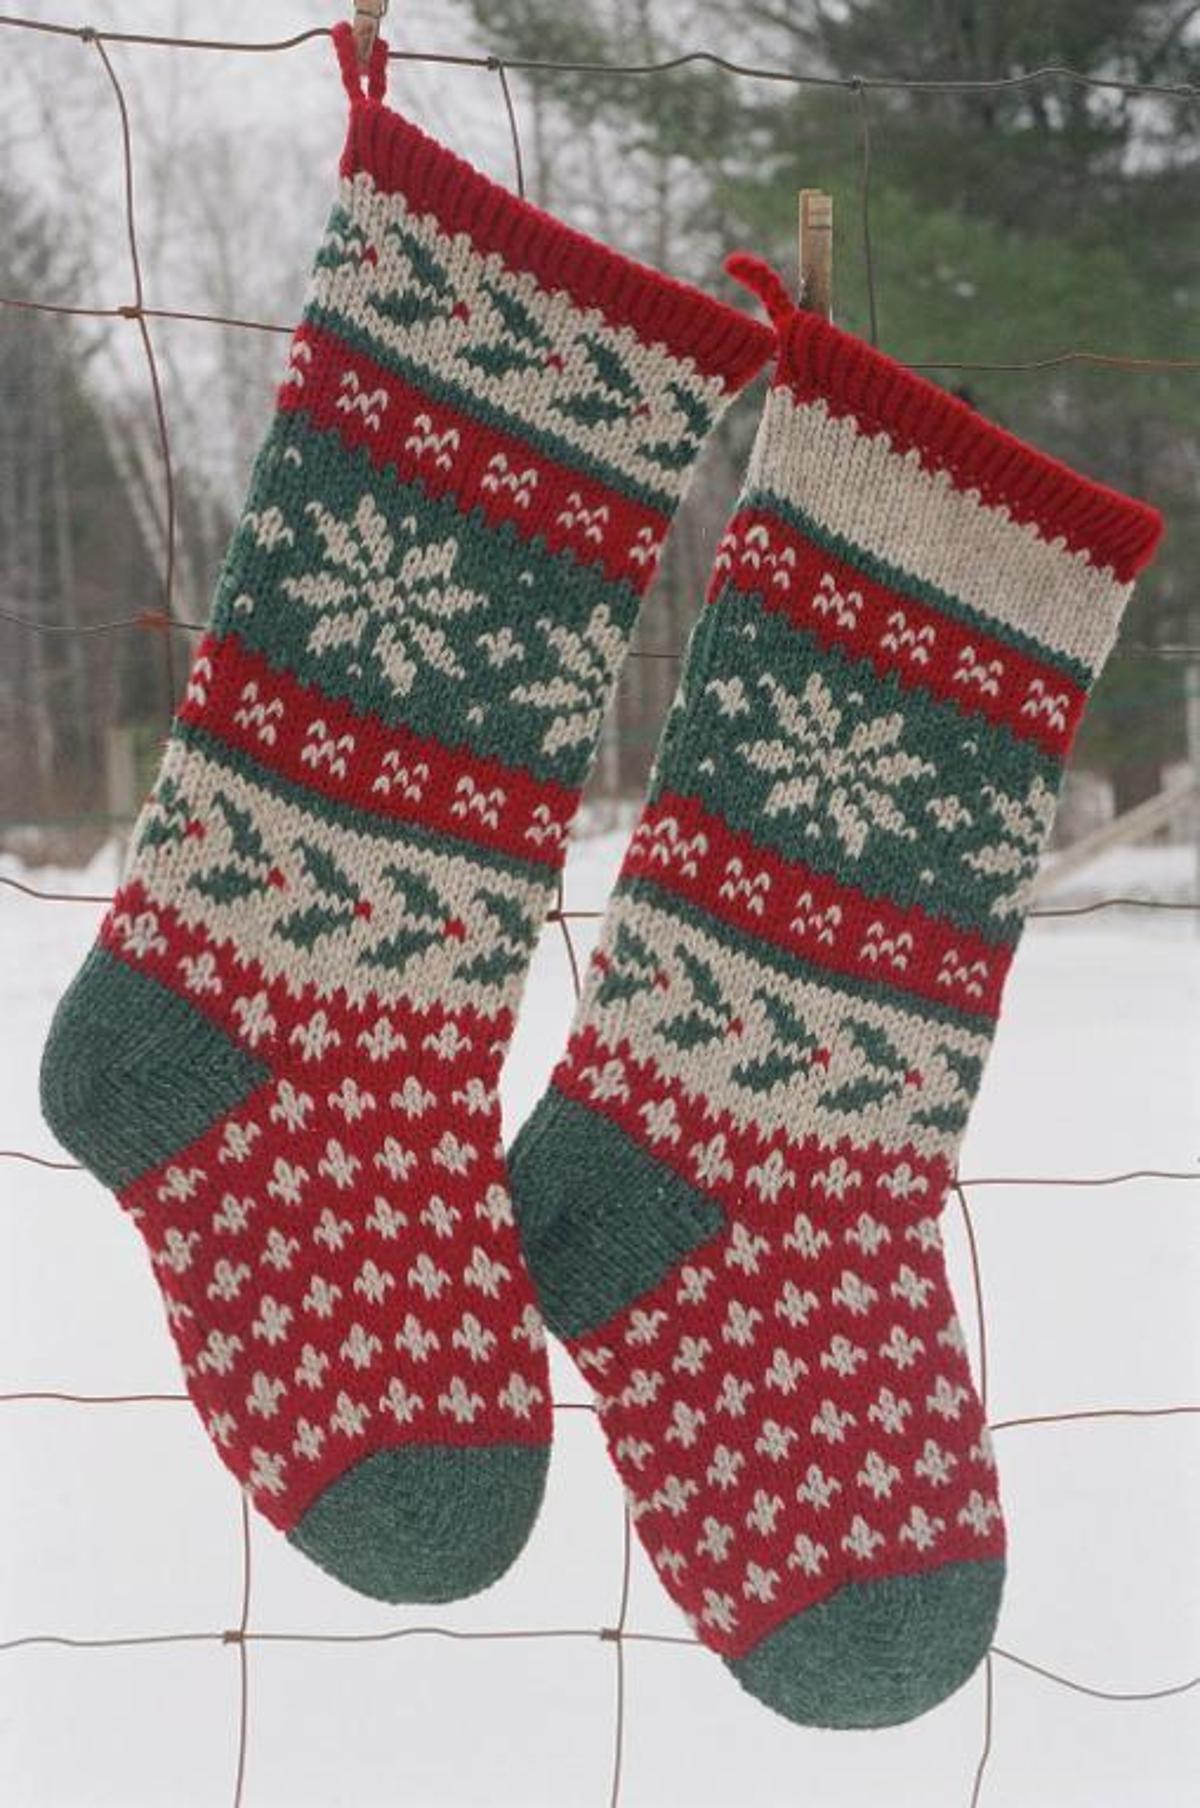 Knitted Christmas Stocking Patterns Personalized Knitted Christmas Stocking Patterns For Real Christmas Feel